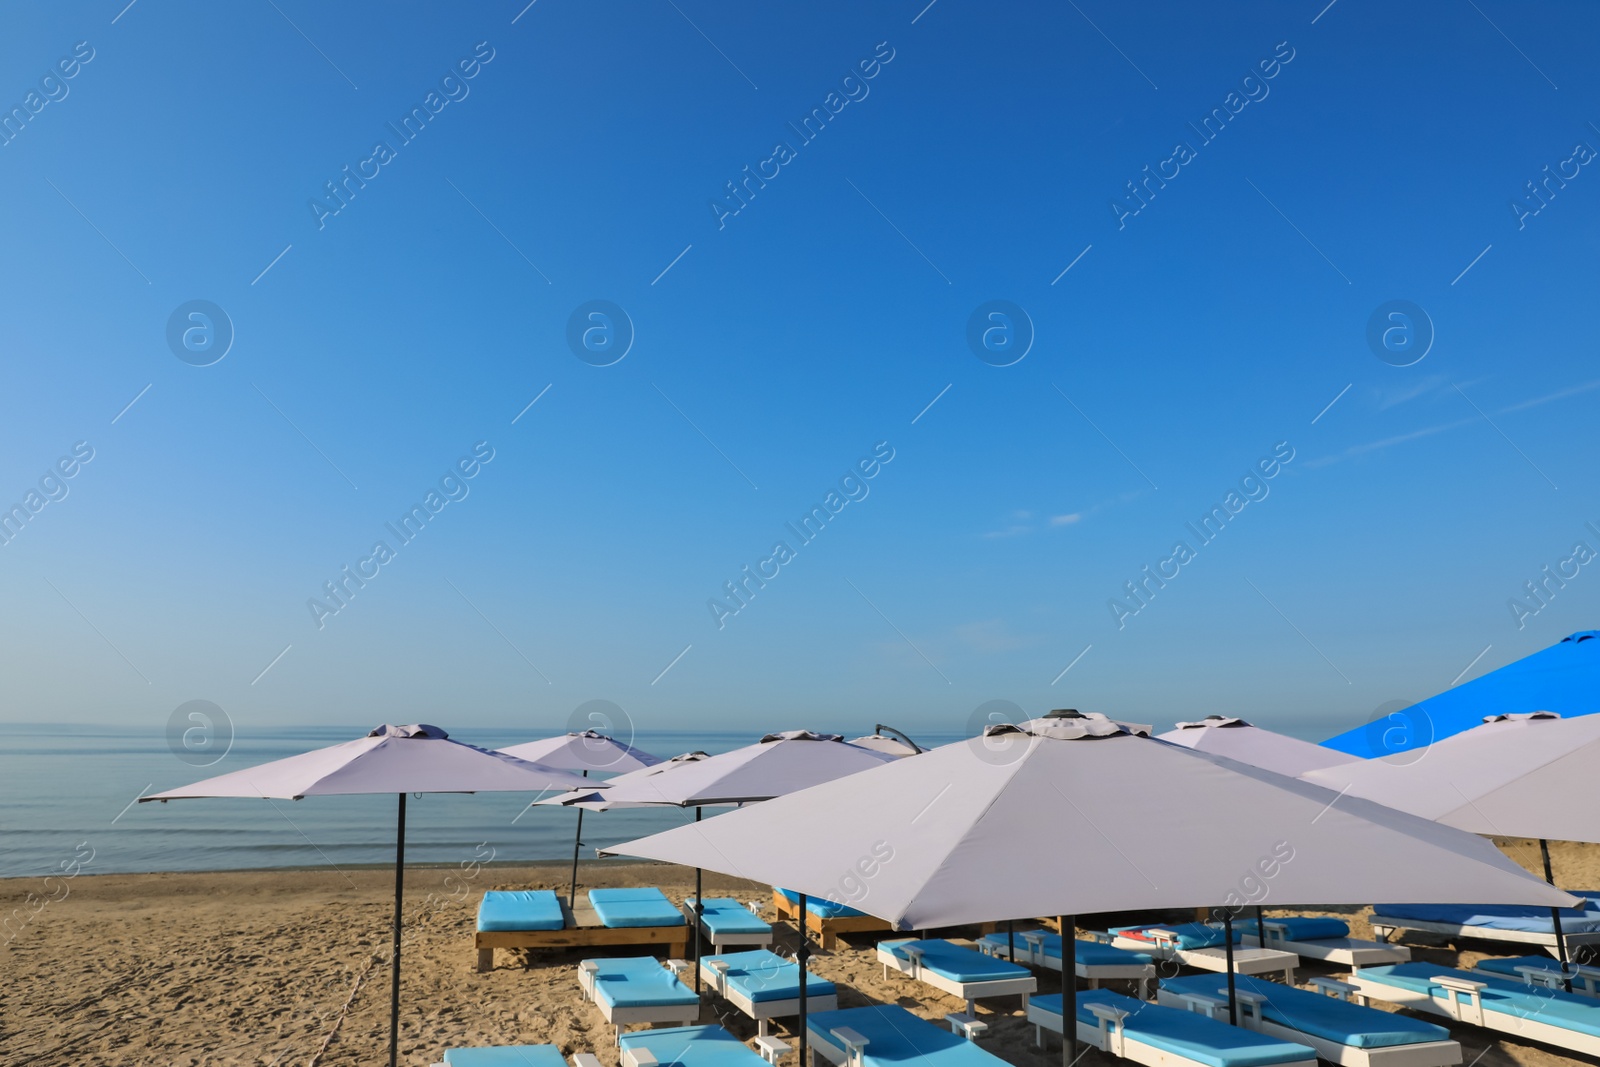 Photo of Many beach umbrellas and sunbeds at resort